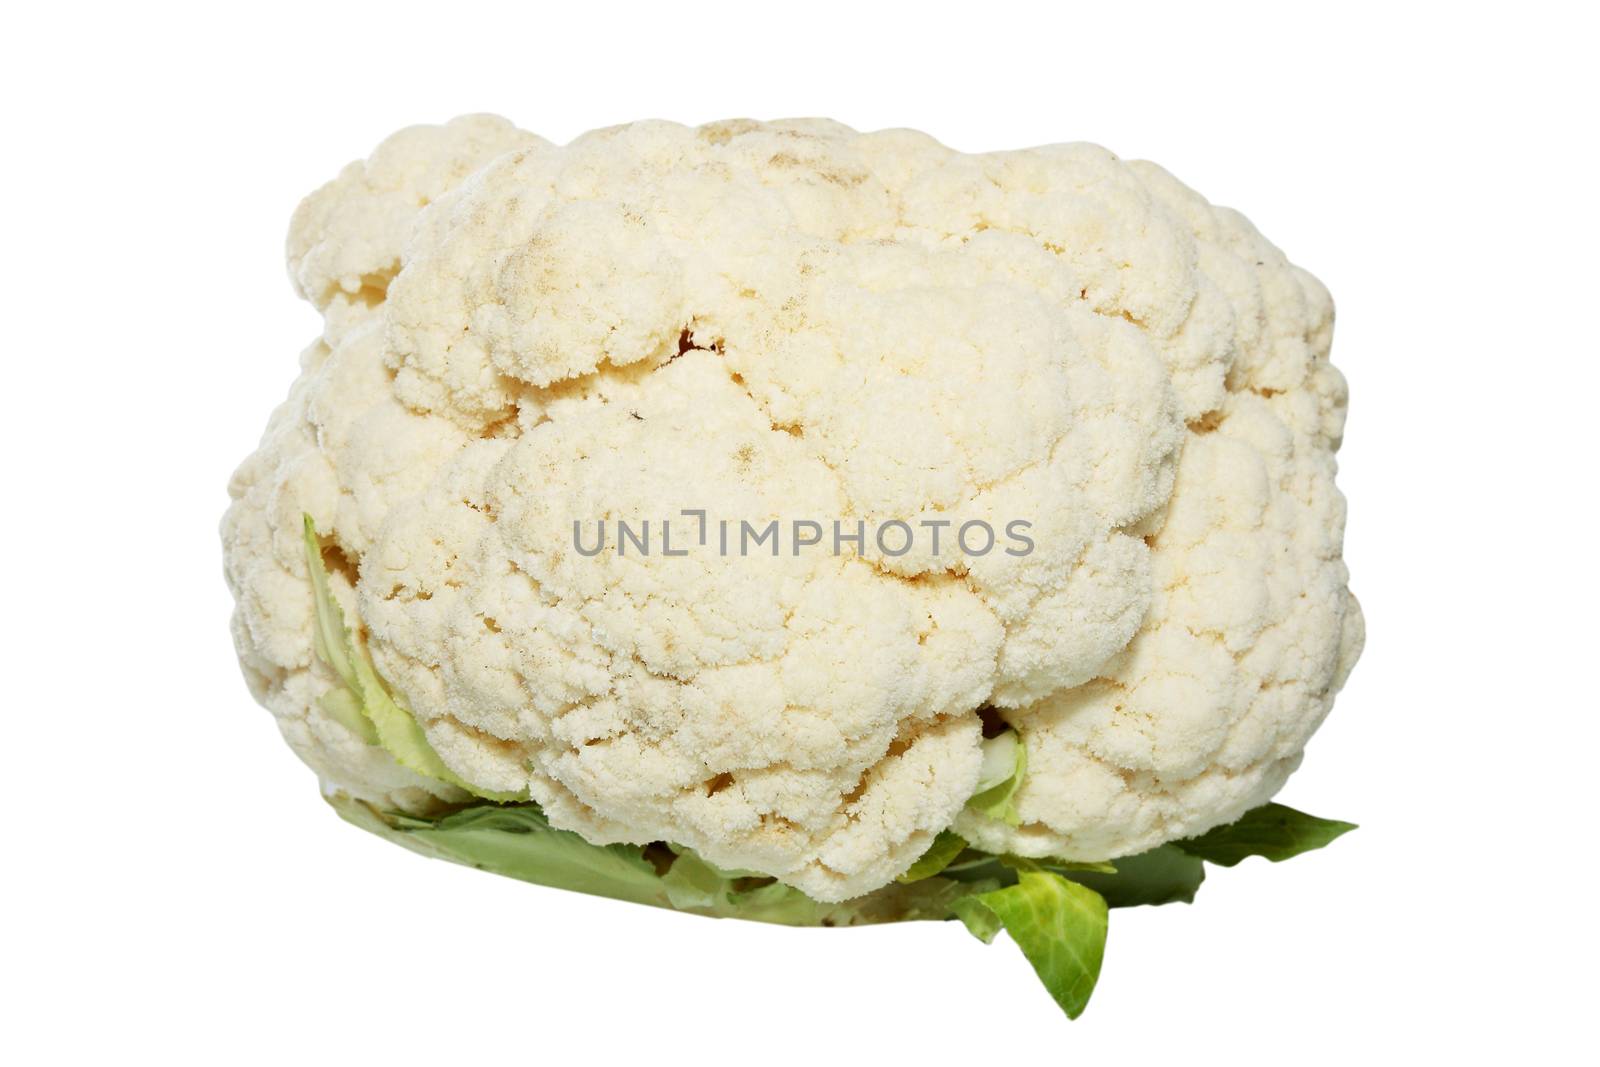 Cauliflower is isolated against the white background